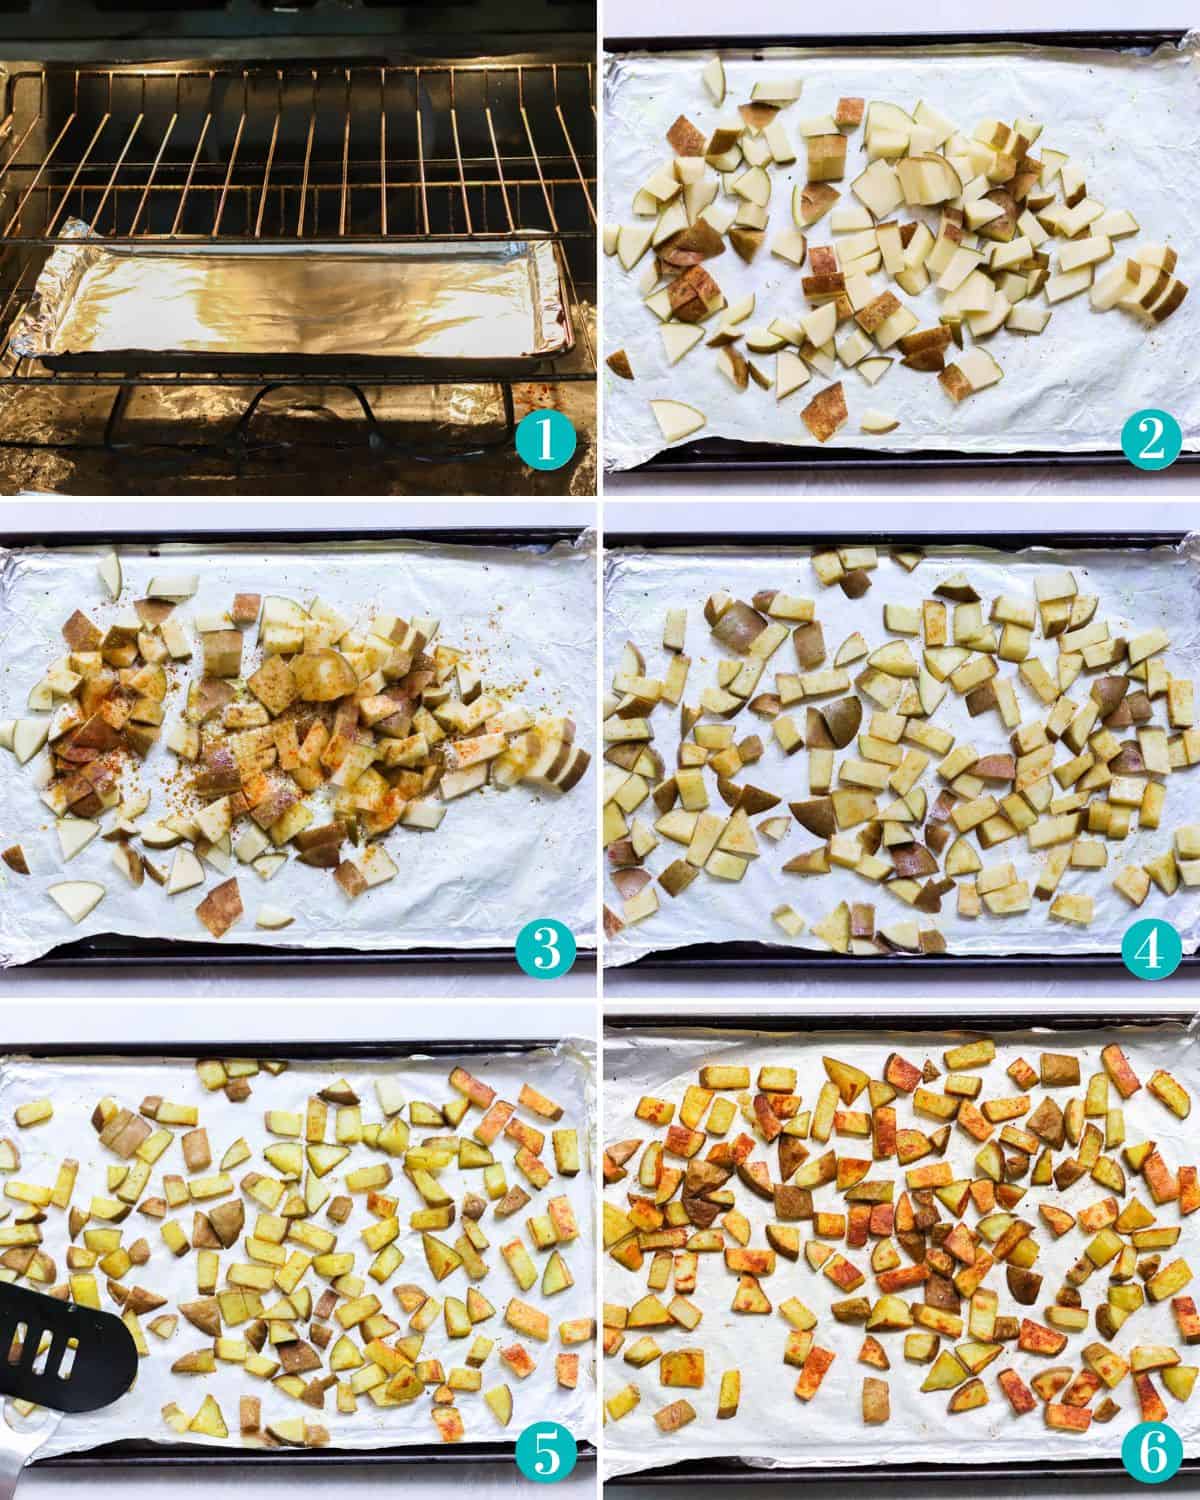 six photo collage with baking sheet preheating in oven, chopped potatoes on baking sheet, spices on potatoes, seasoned potatoes before cooking, potatoes halfway through cooking with a spatula, and finished roasted potaotes.